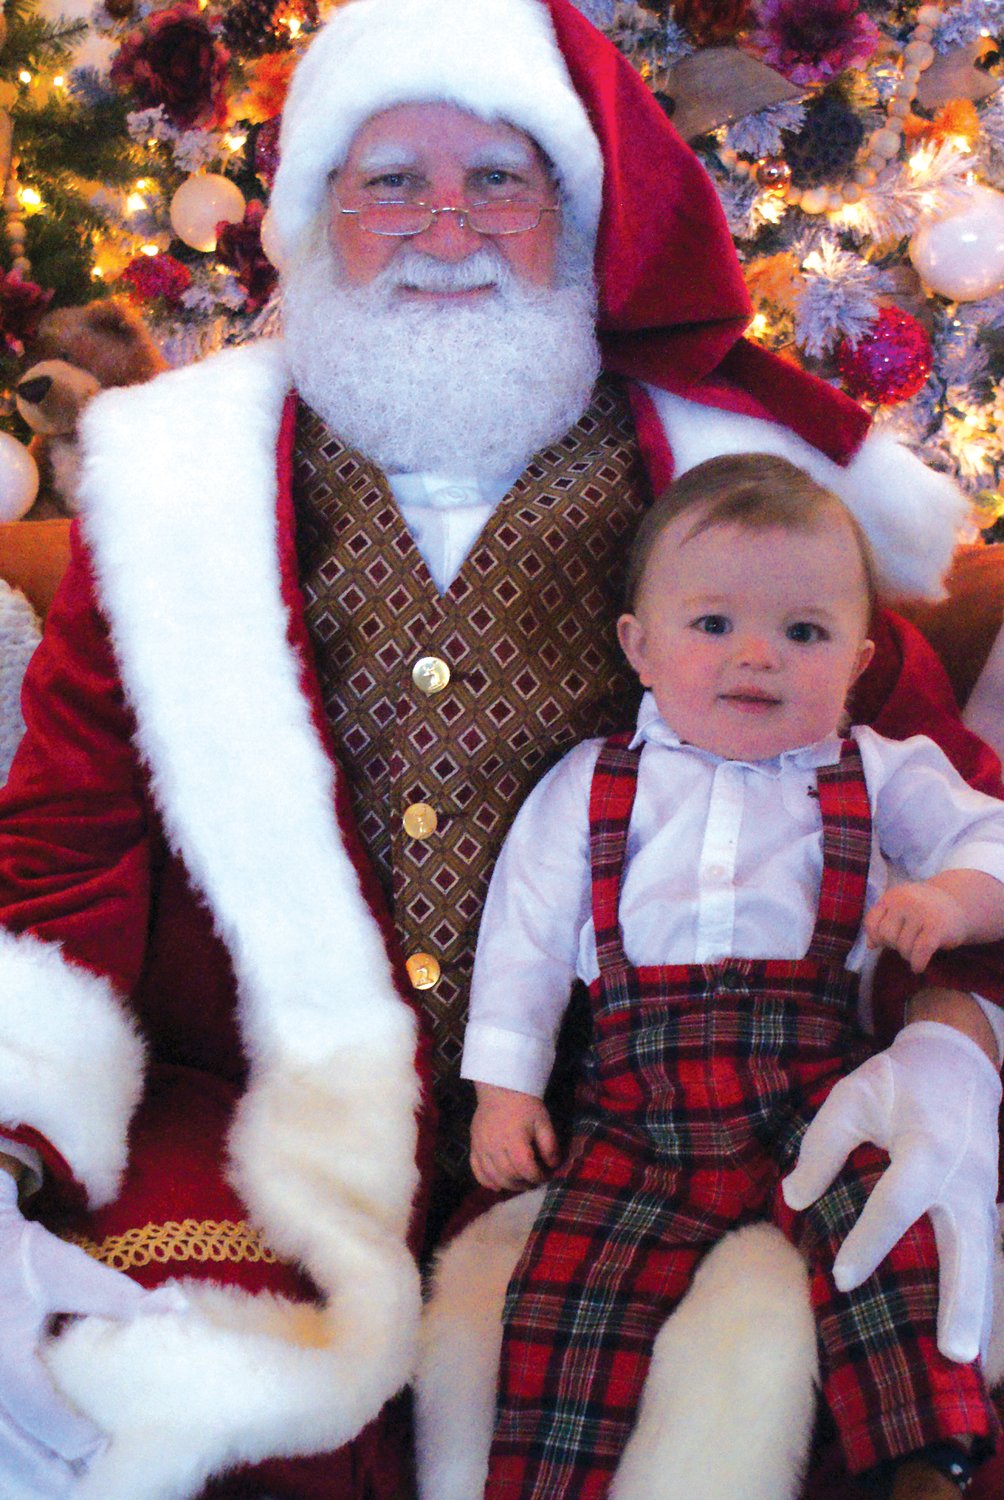 HIS FIRST CHRISTMAS: Ten-month-old Presley Forsythe celebrated his first Christmas with a visit to Santa at Garden City Center this past Saturday.